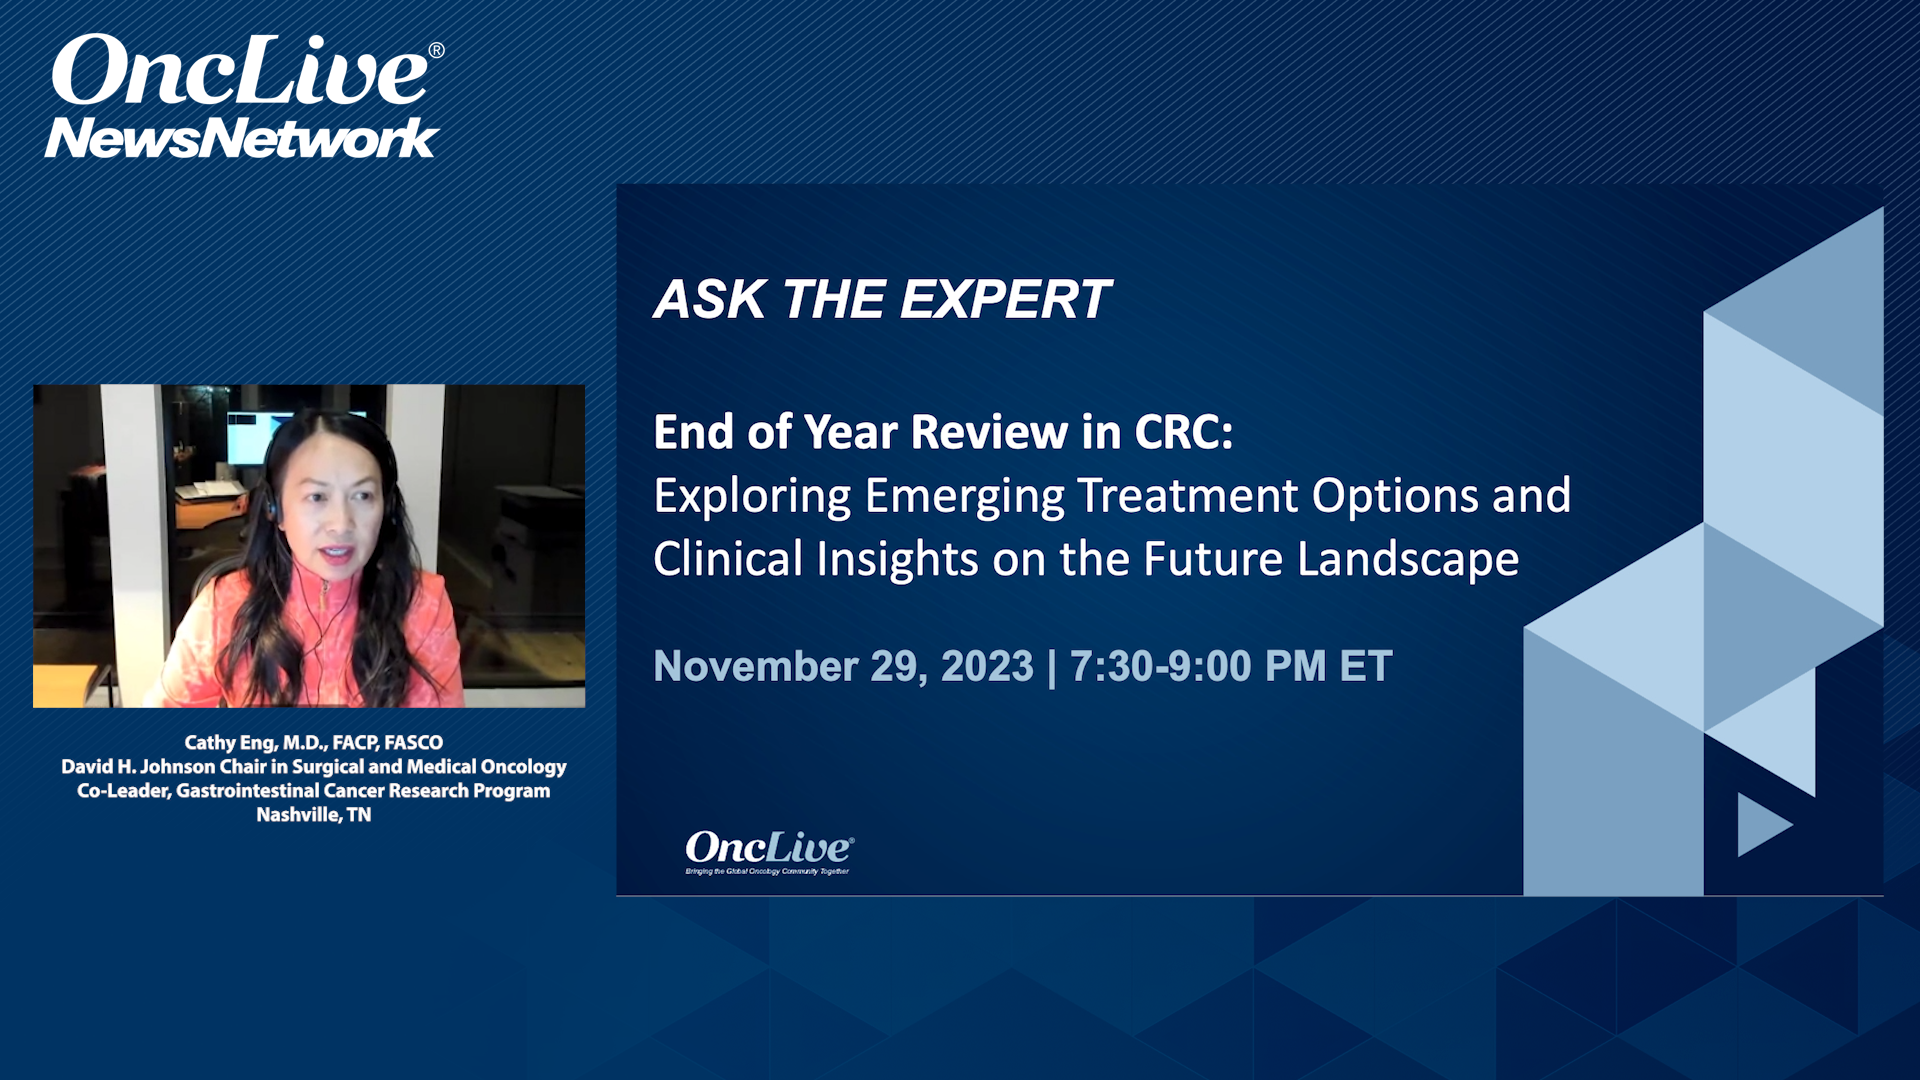 End of Year Review in CRC: Exploring Emerging Treatment Options and Clinical Insights on the Future Landscape